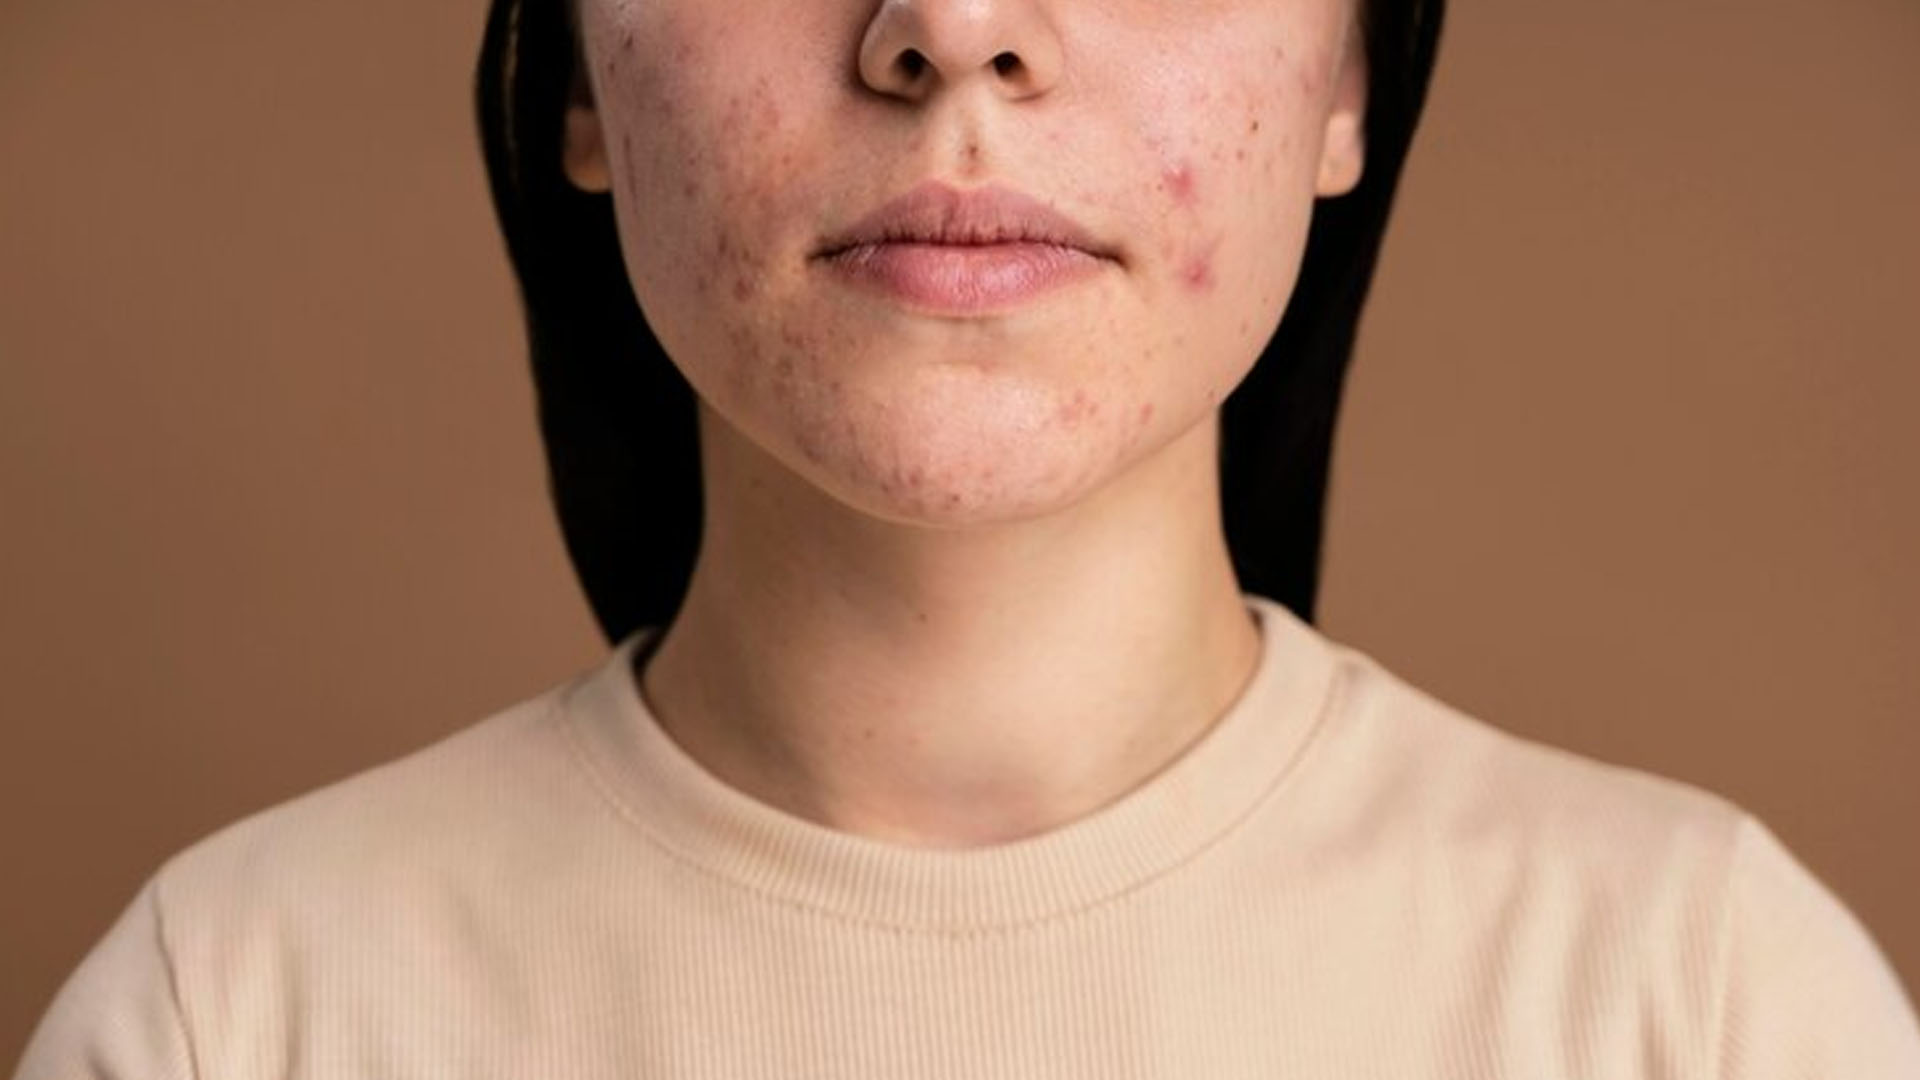 What are the Home Remedies for Warts on Face?